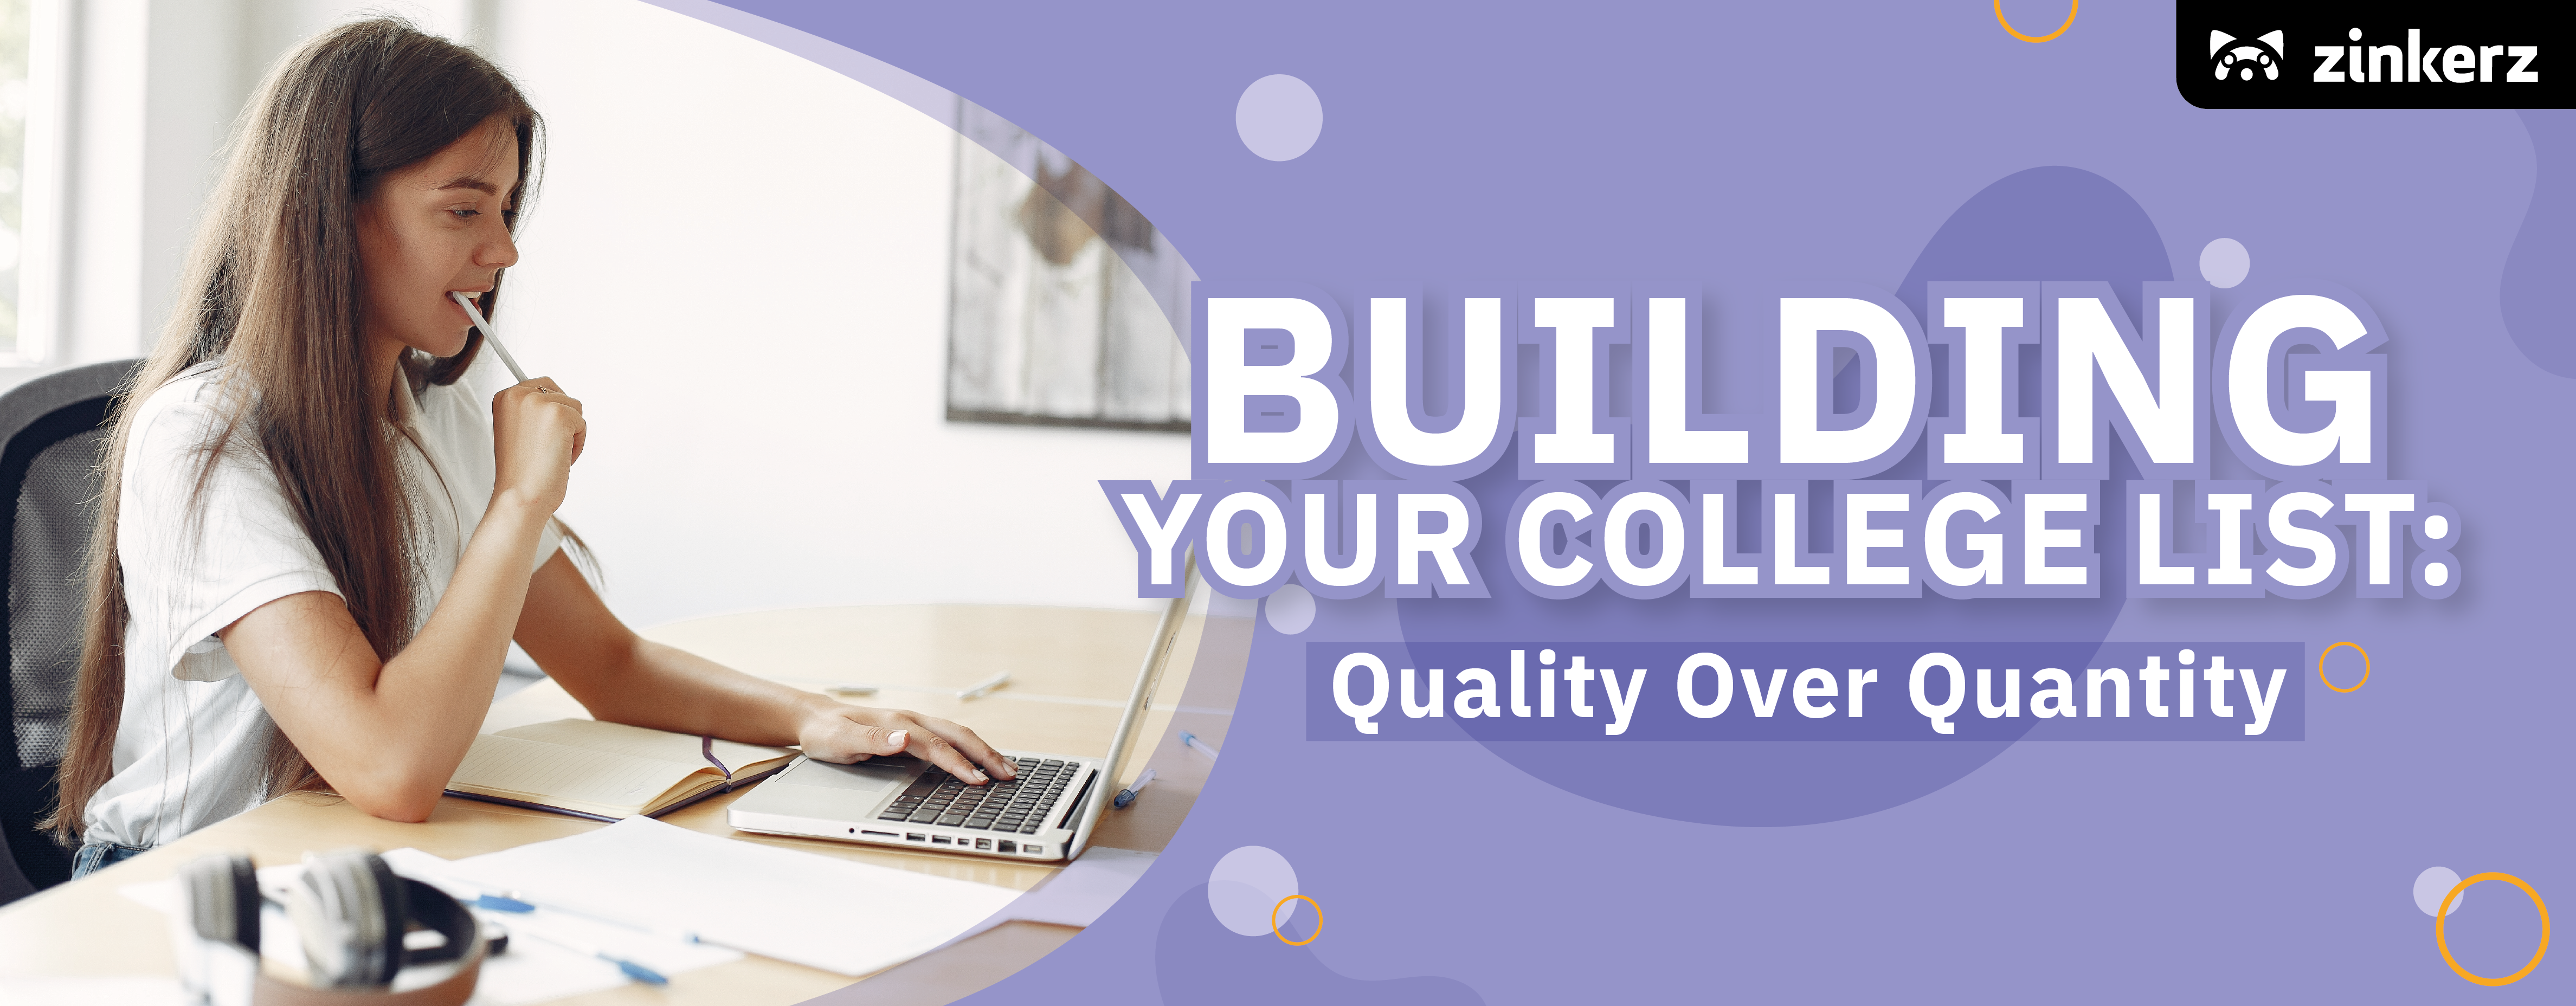 Building Your College List: Quality Over Quantity